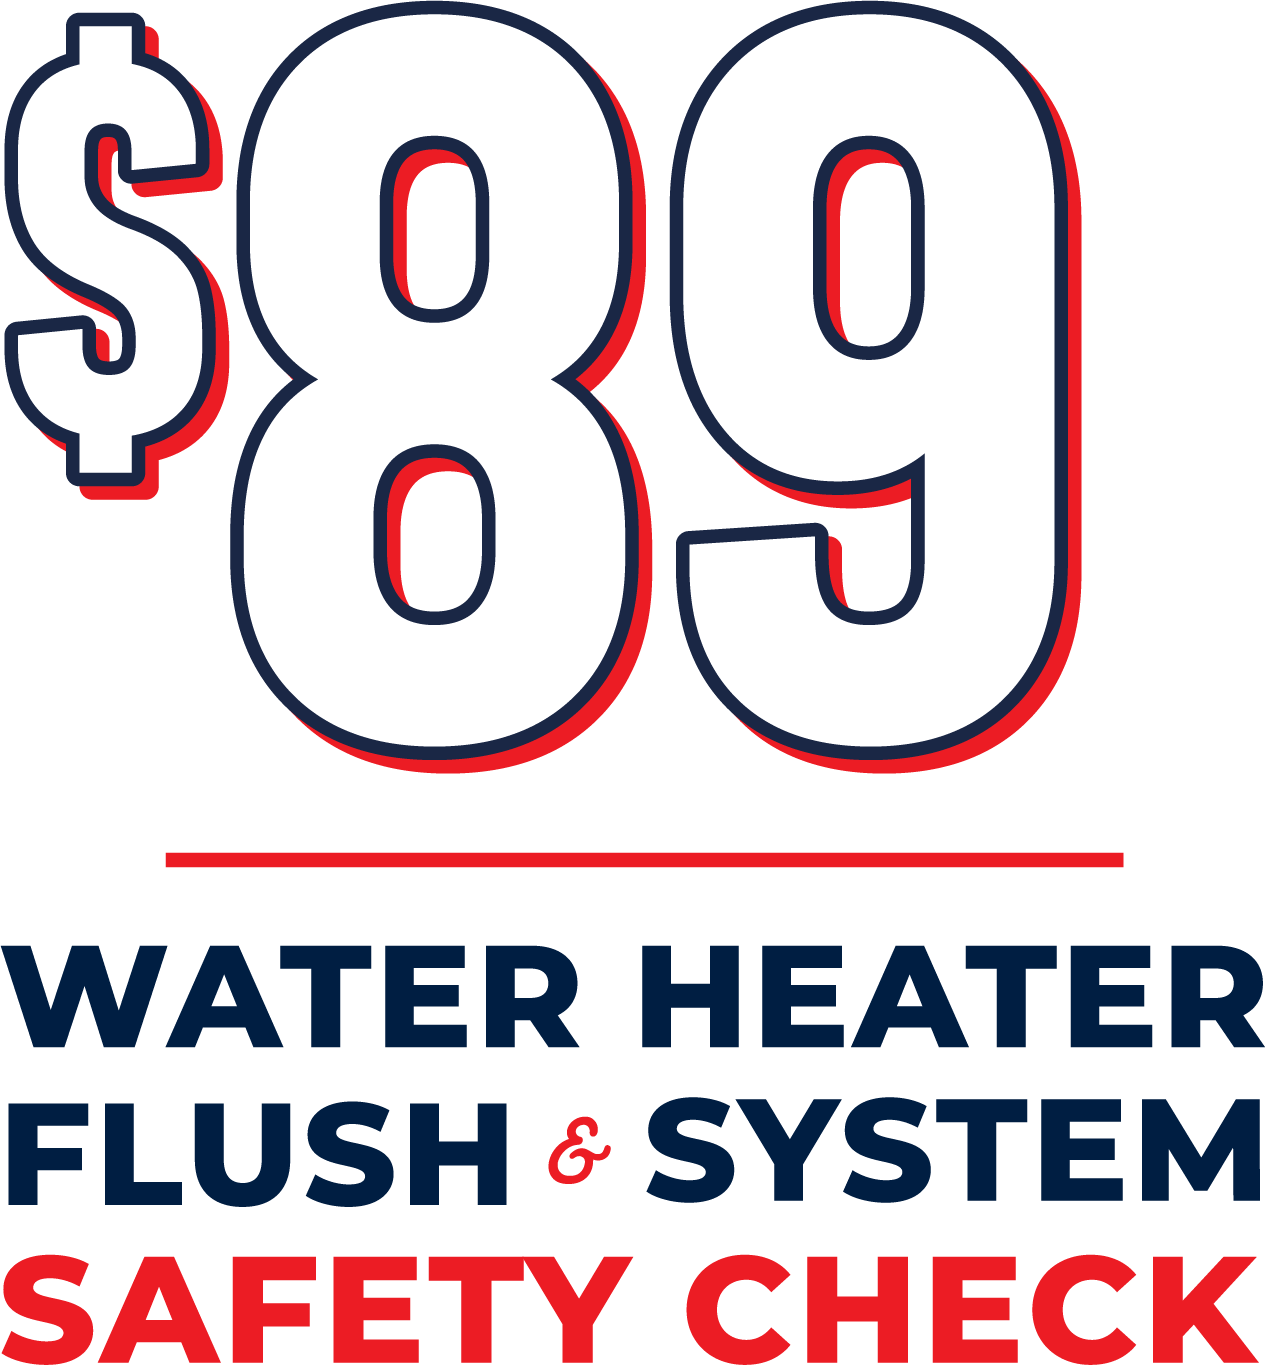 $89 water heater flush & system safety check!